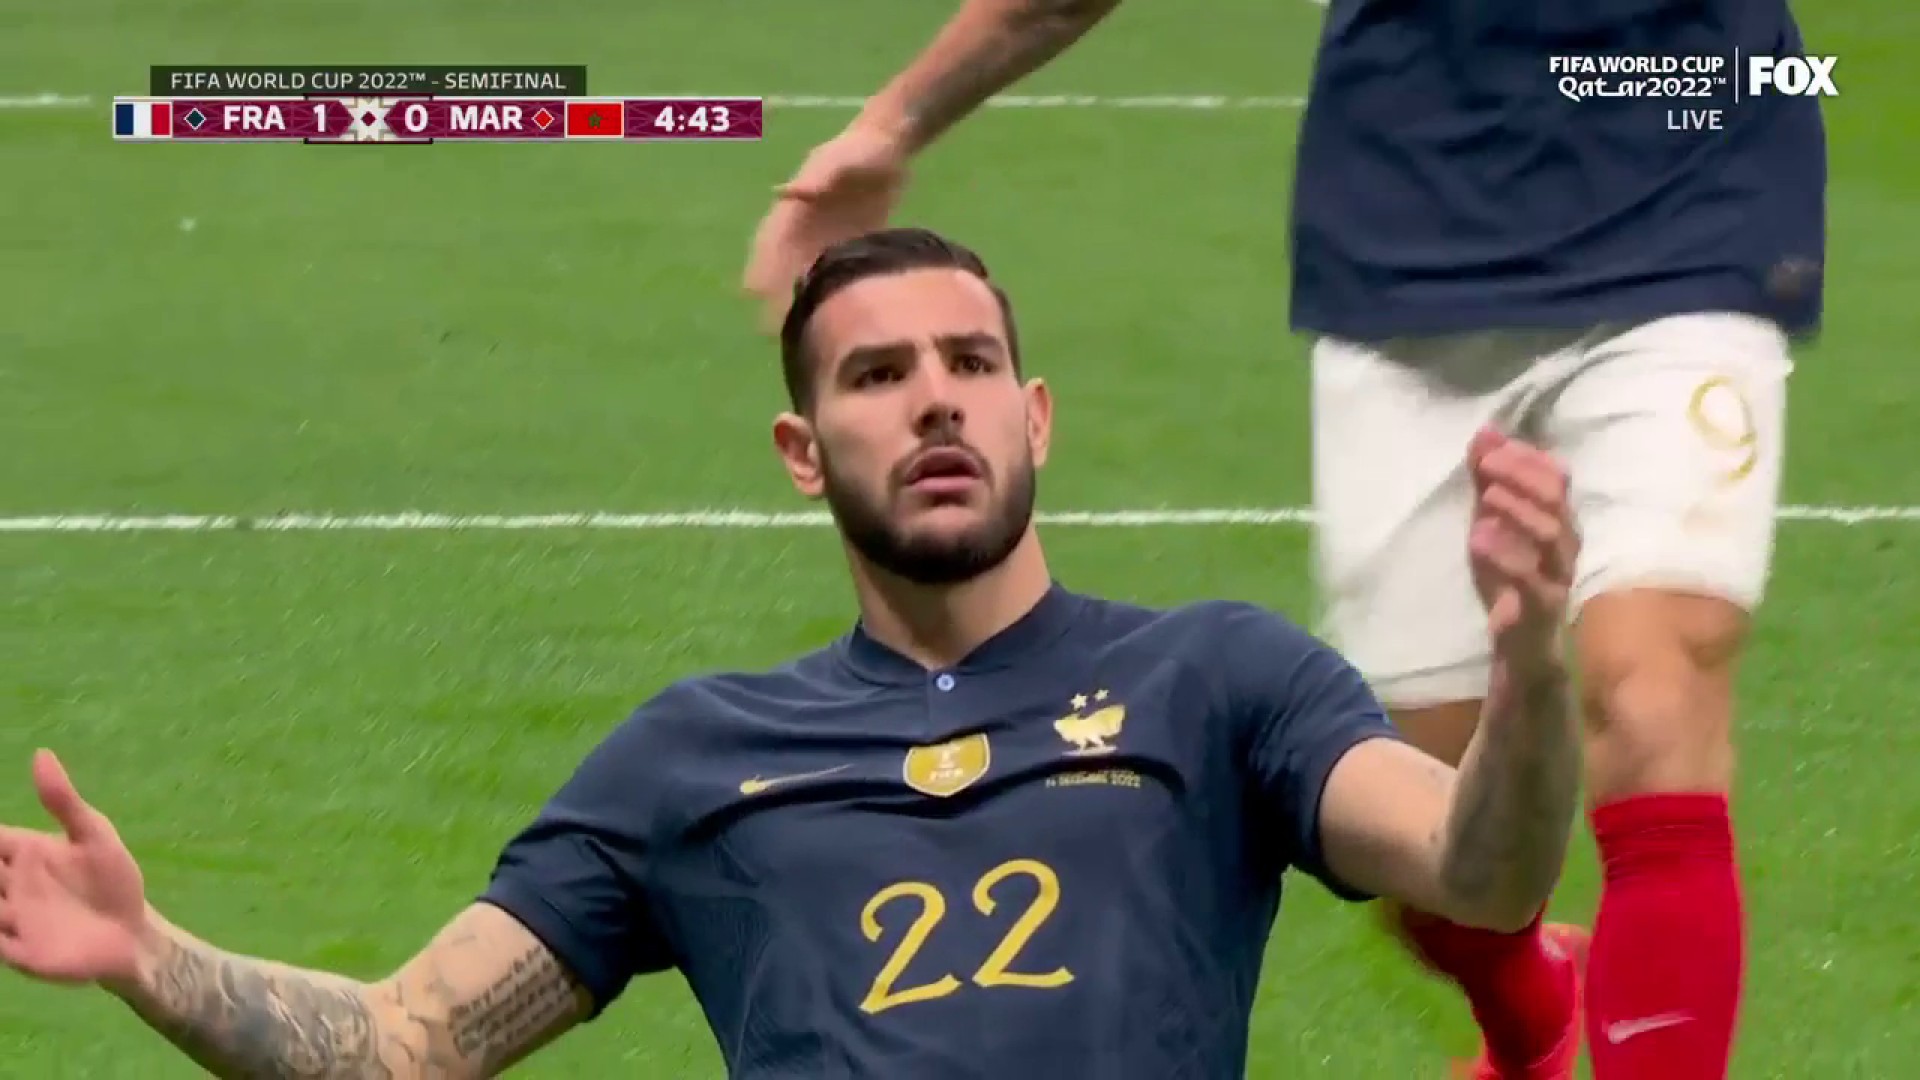 THE DEFENDING CHAMPIONS SCORE FIRST

Theo Hernández puts France out in front 🇫🇷”